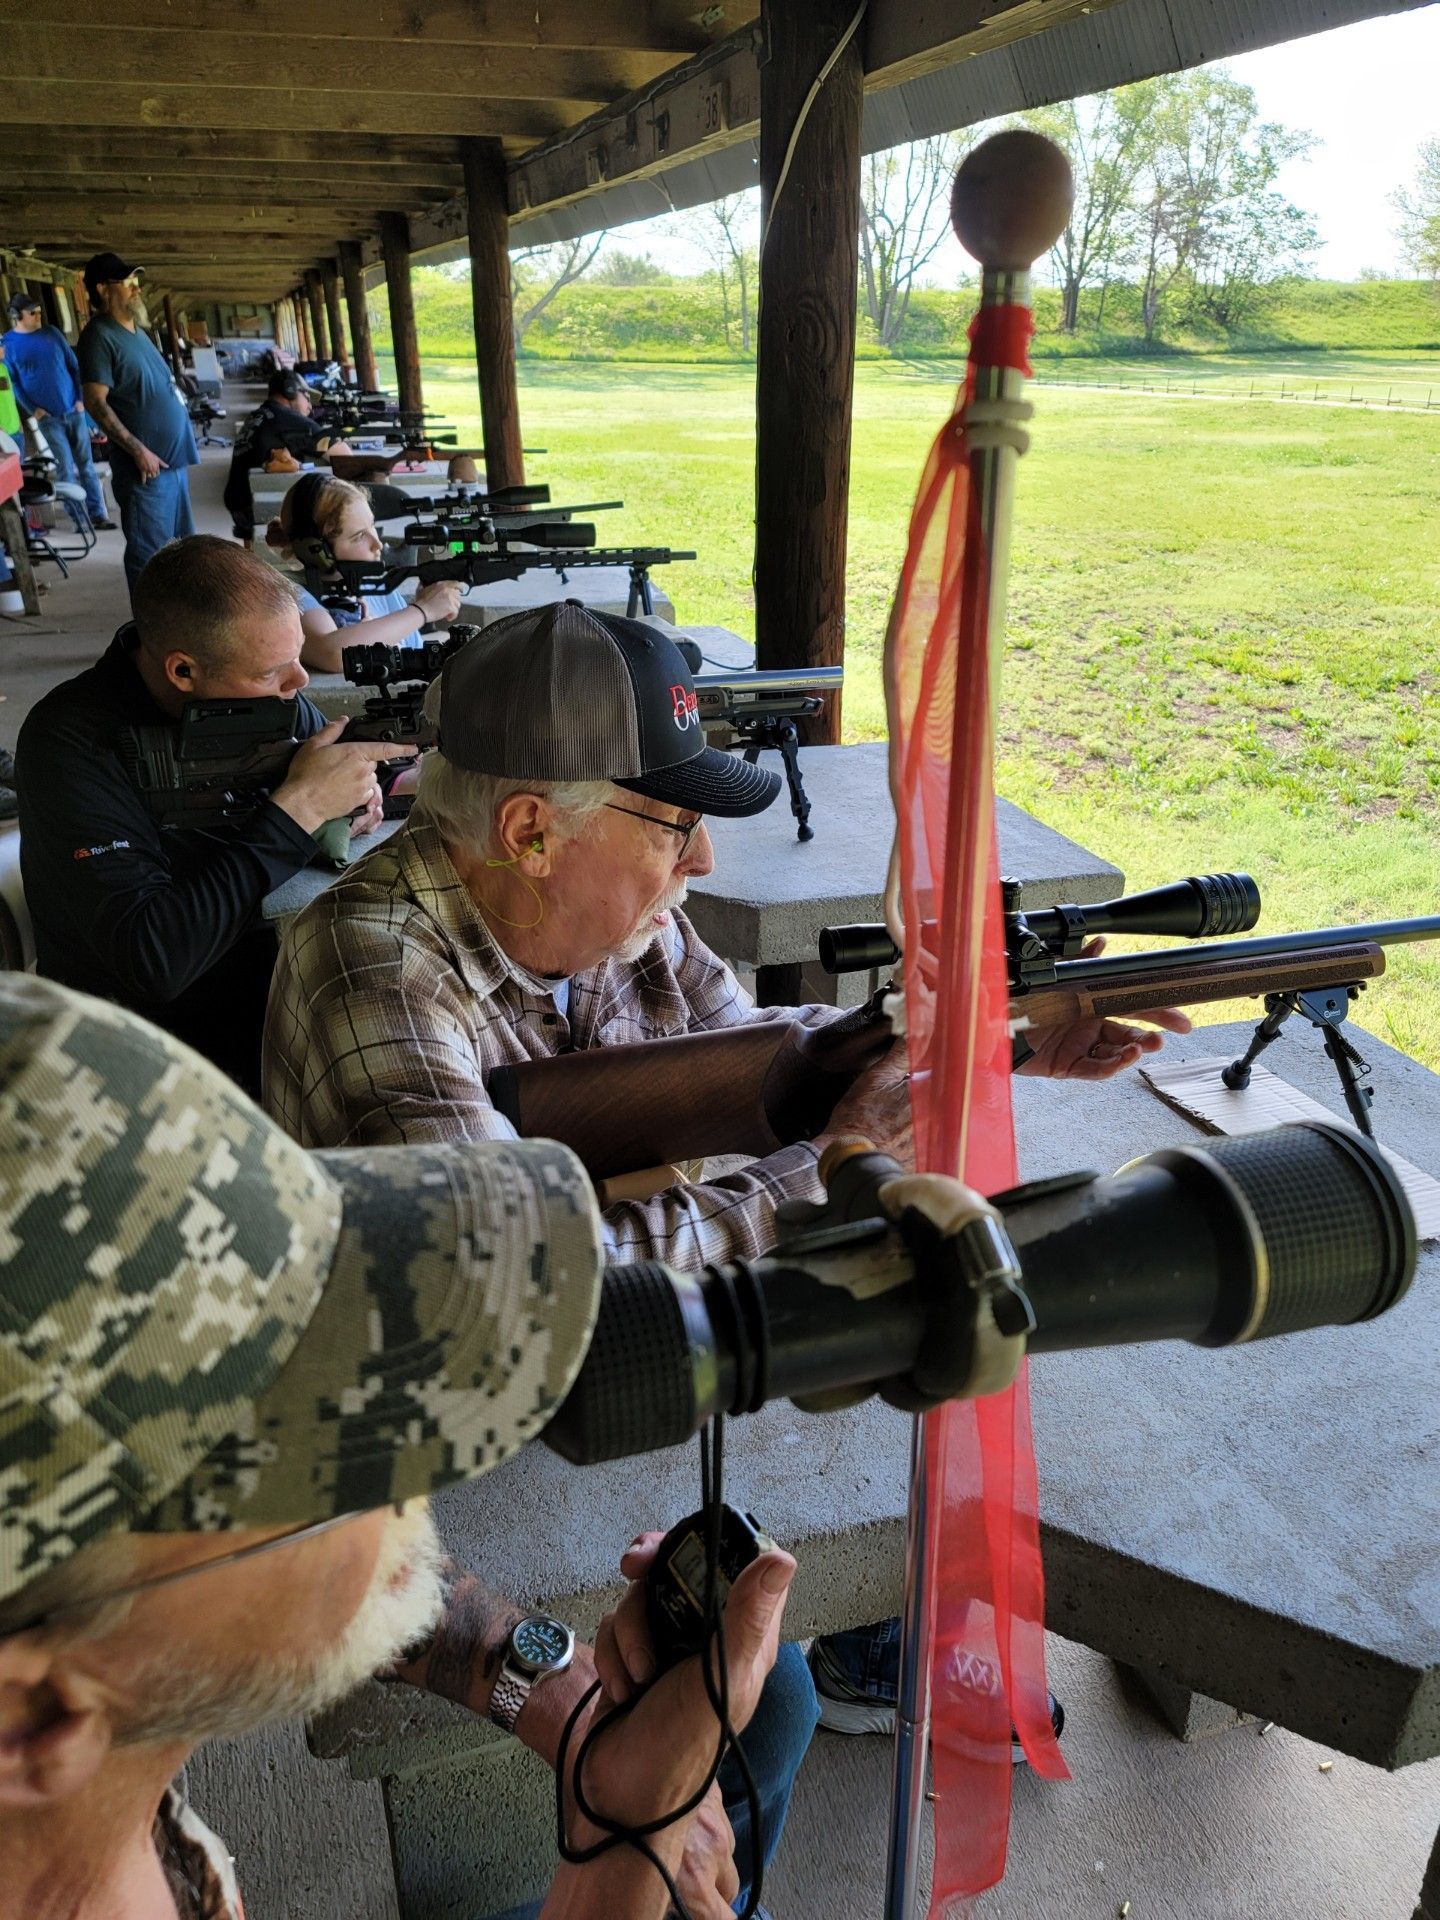 looking down line of men and young people shooting rifles at gun range